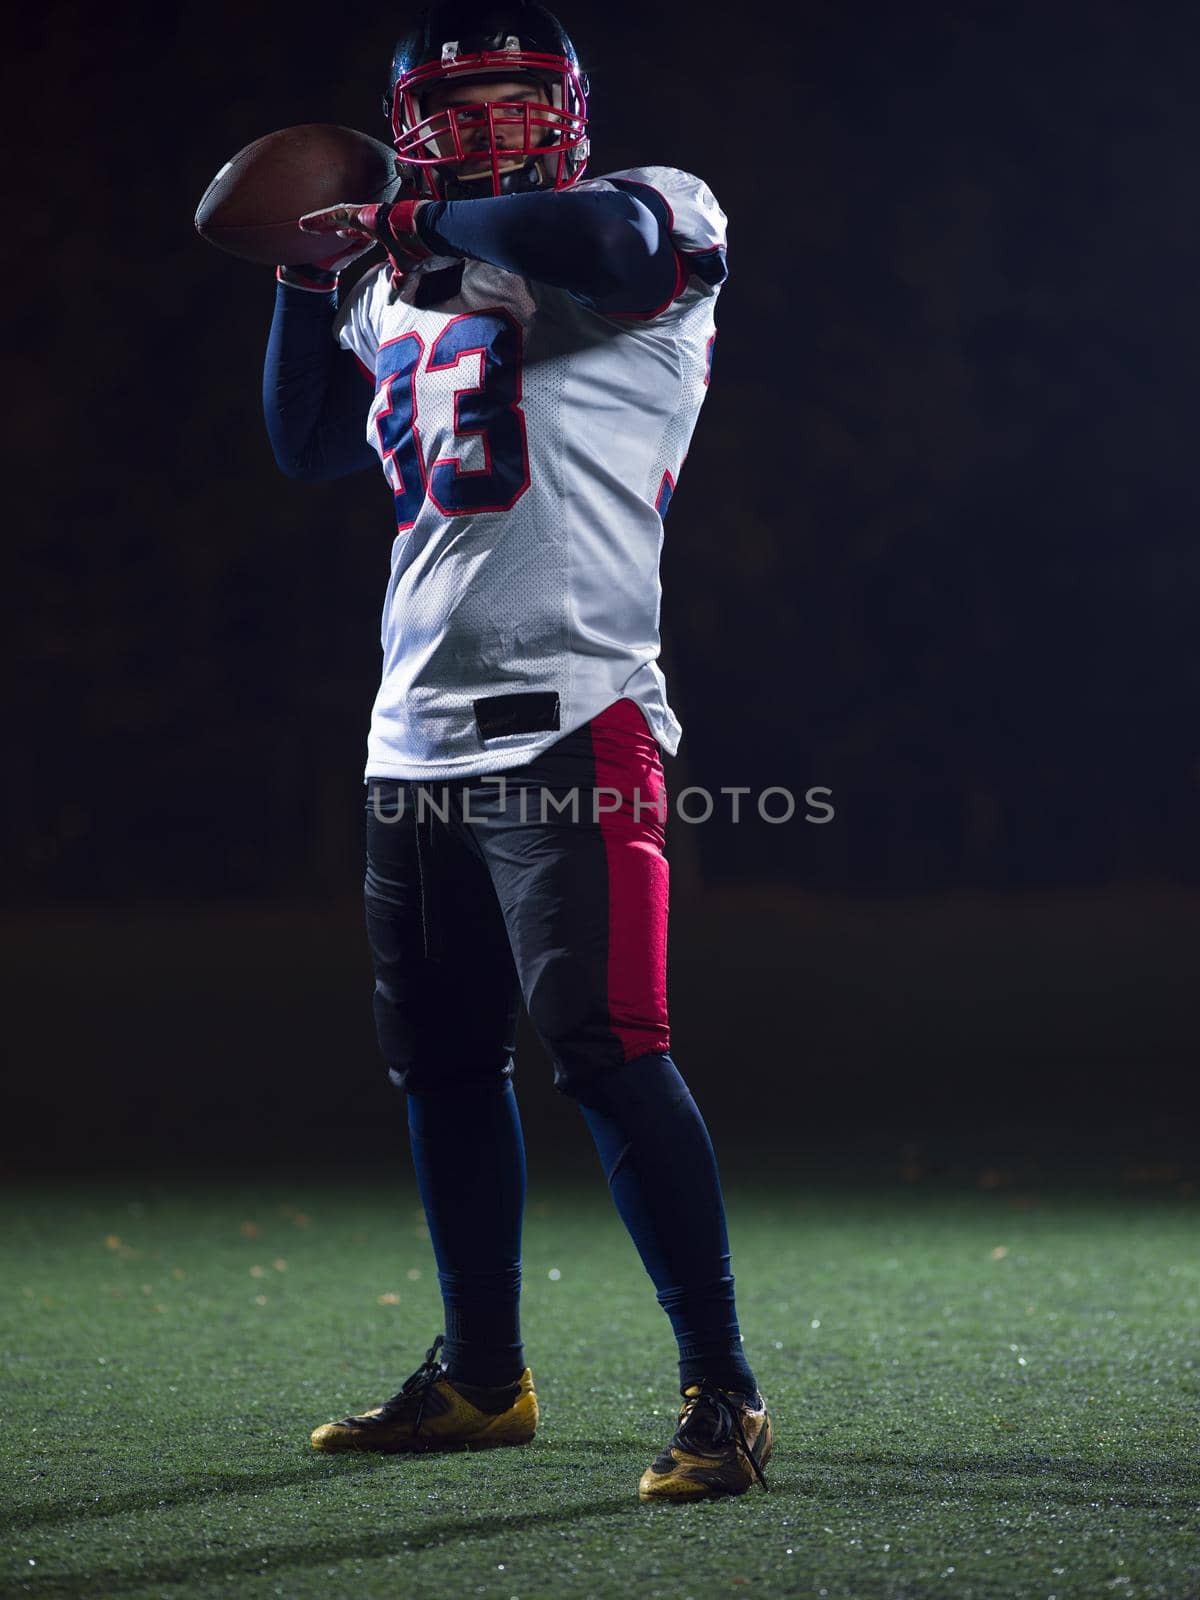 american football player throwing rugby ball by dotshock